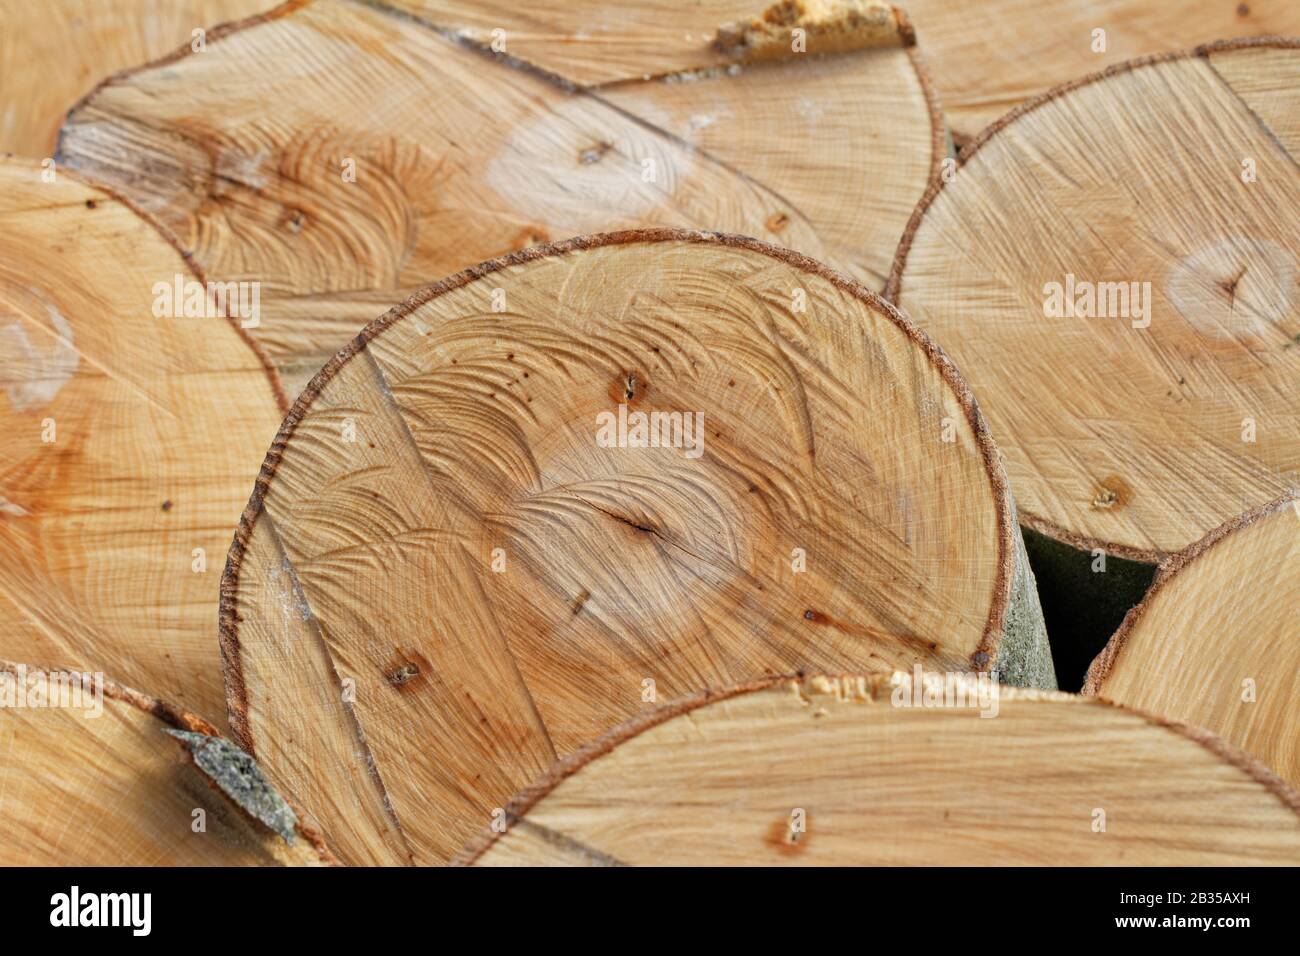 Timber Textures: cross-section details of  freshly felled beech trunks showing some chain saw's cutting marks Stock Photo